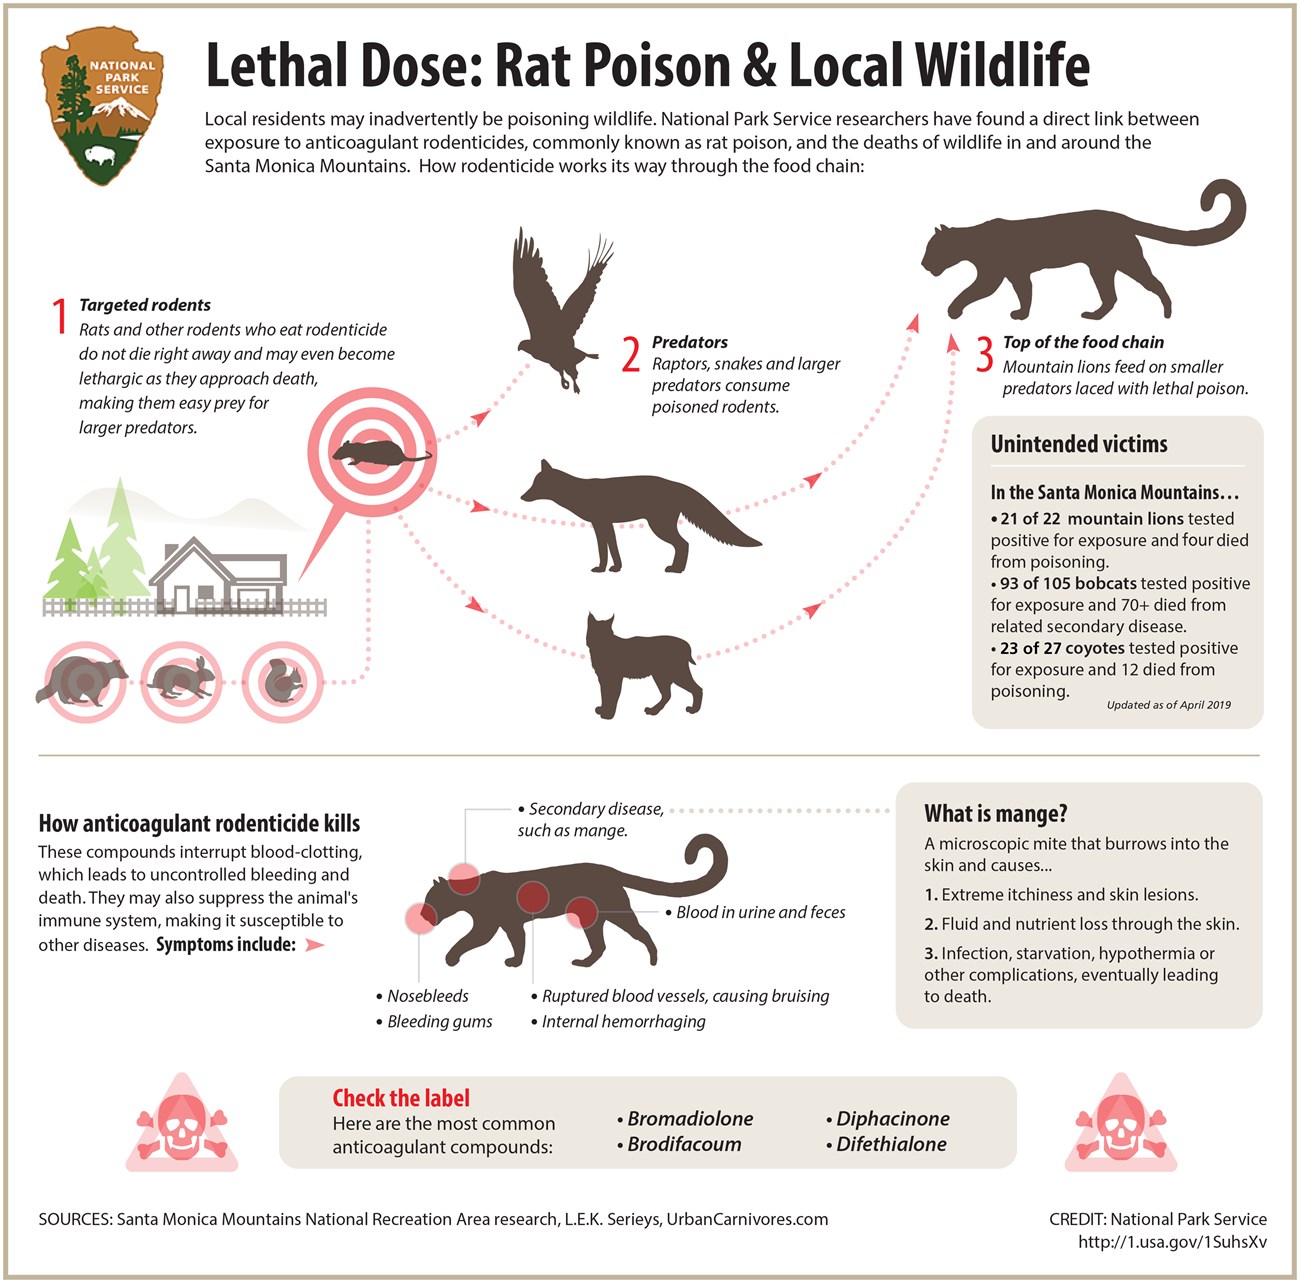 https://www.nps.gov/samo/learn/management/images/2019_Rodenticide_Infographic_2.jpg?maxwidth=1300&maxheight=1300&autorotate=false